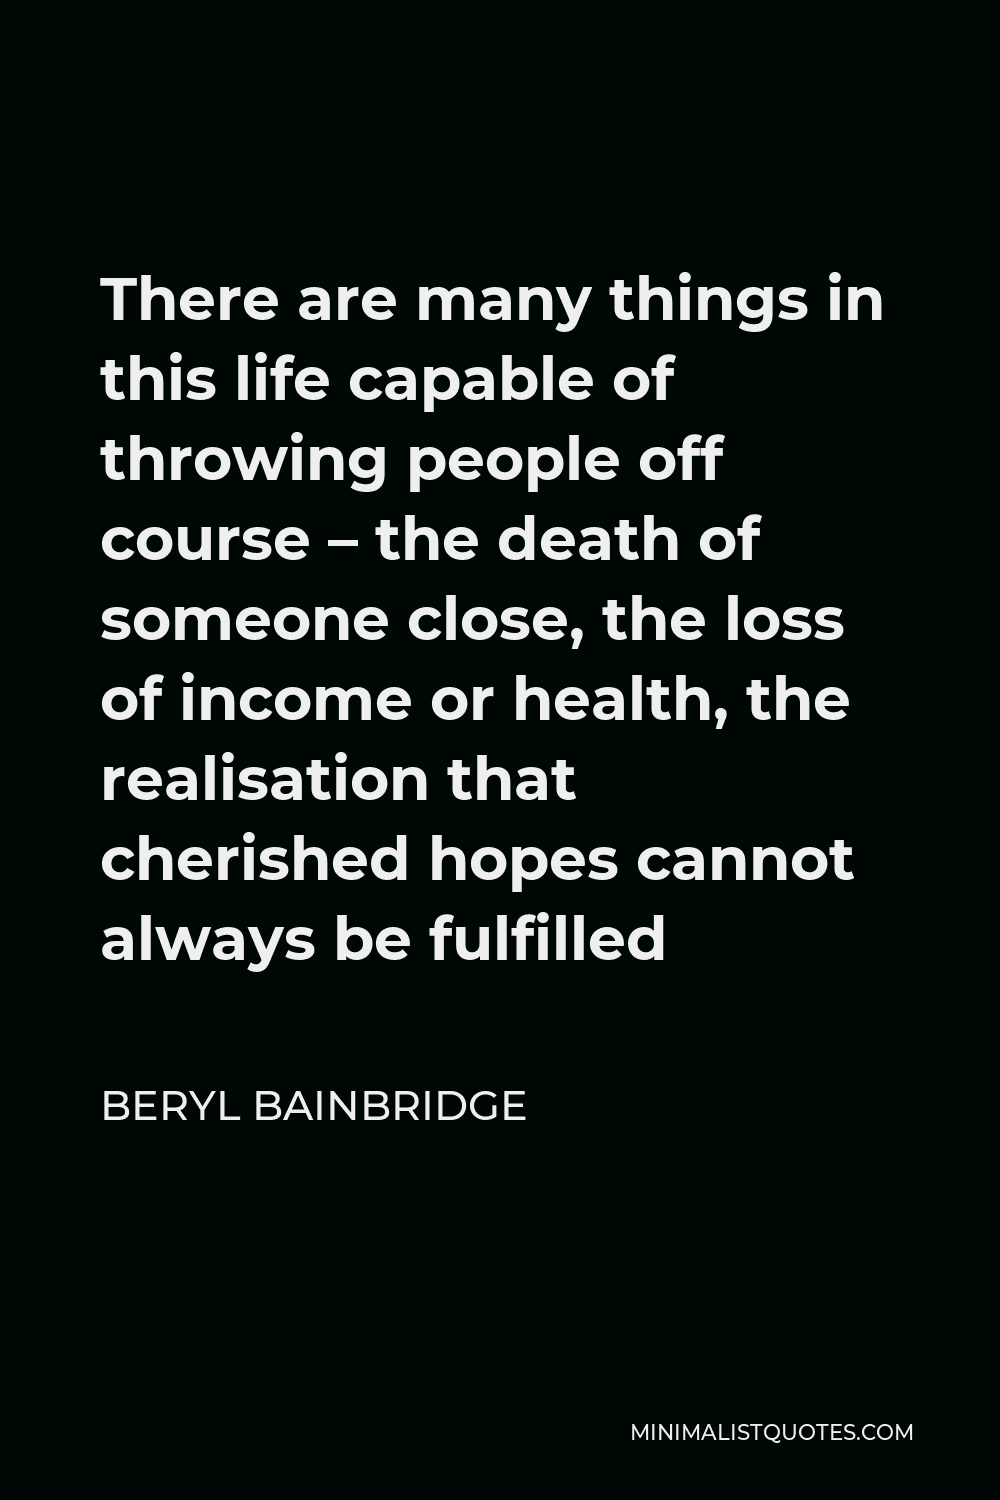 Beryl Bainbridge Quote - There are many things in this life capable of throwing people off course – the death of someone close, the loss of income or health, the realisation that cherished hopes cannot always be fulfilled